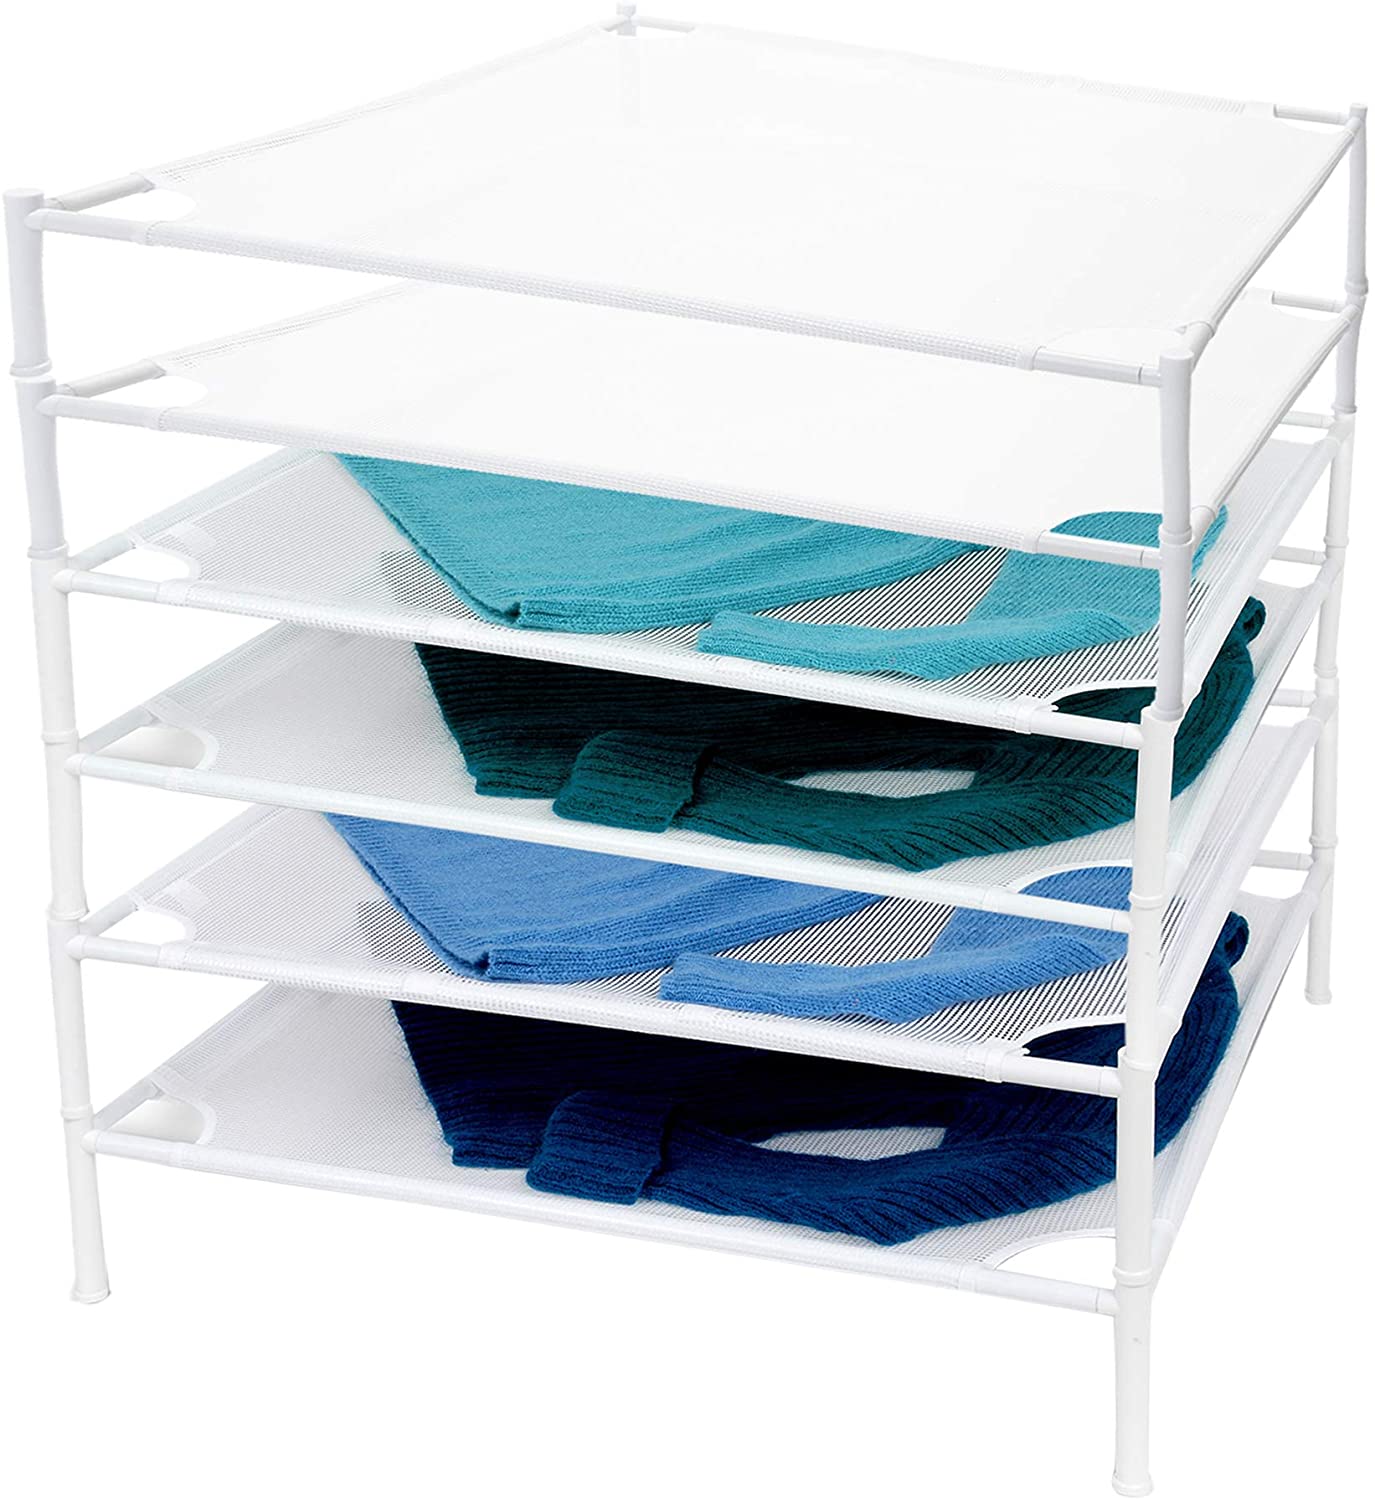 Smart Dryer  Clothes line, Clothes drying racks, Drying rack